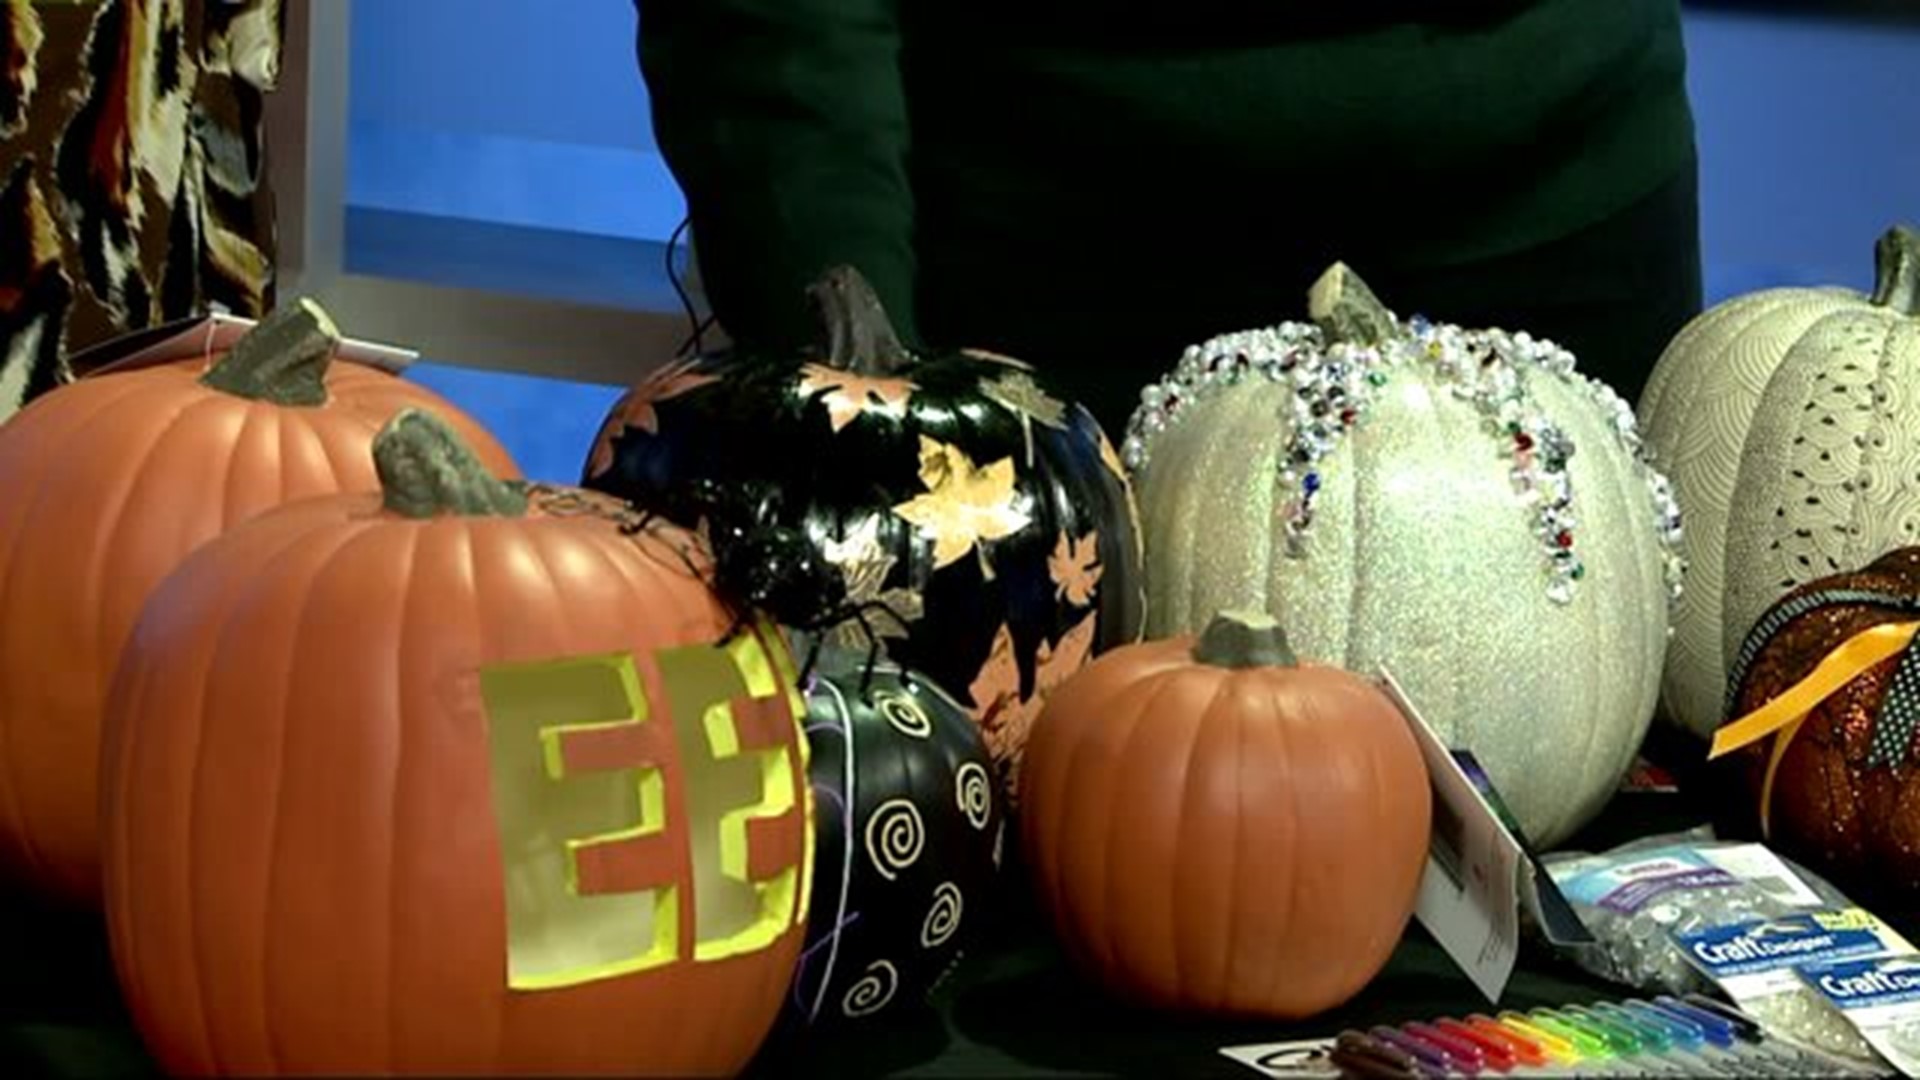 Get creative this Halloween with this DIY `fun-kin` project